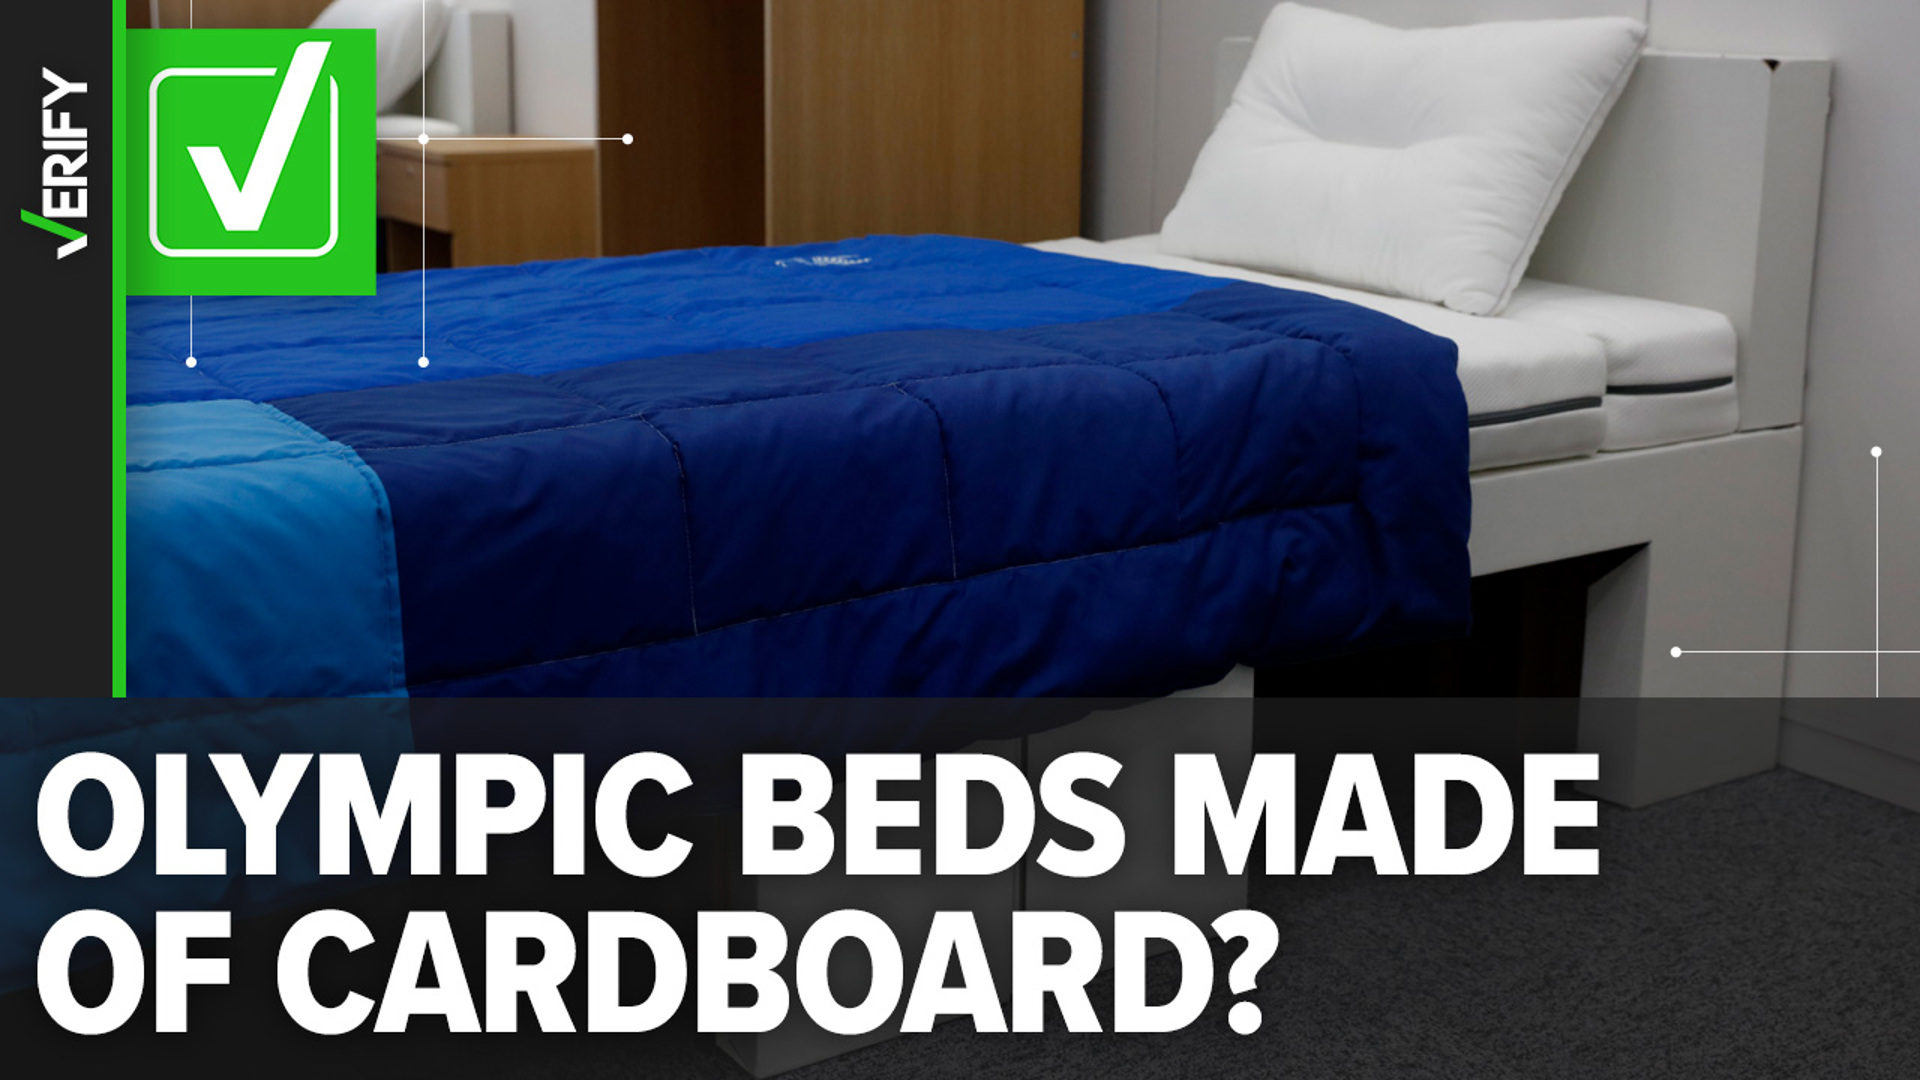 The beds are made out of cardboard for sustainability purposes and will be recycled in France after the 2024 summer Olympics.